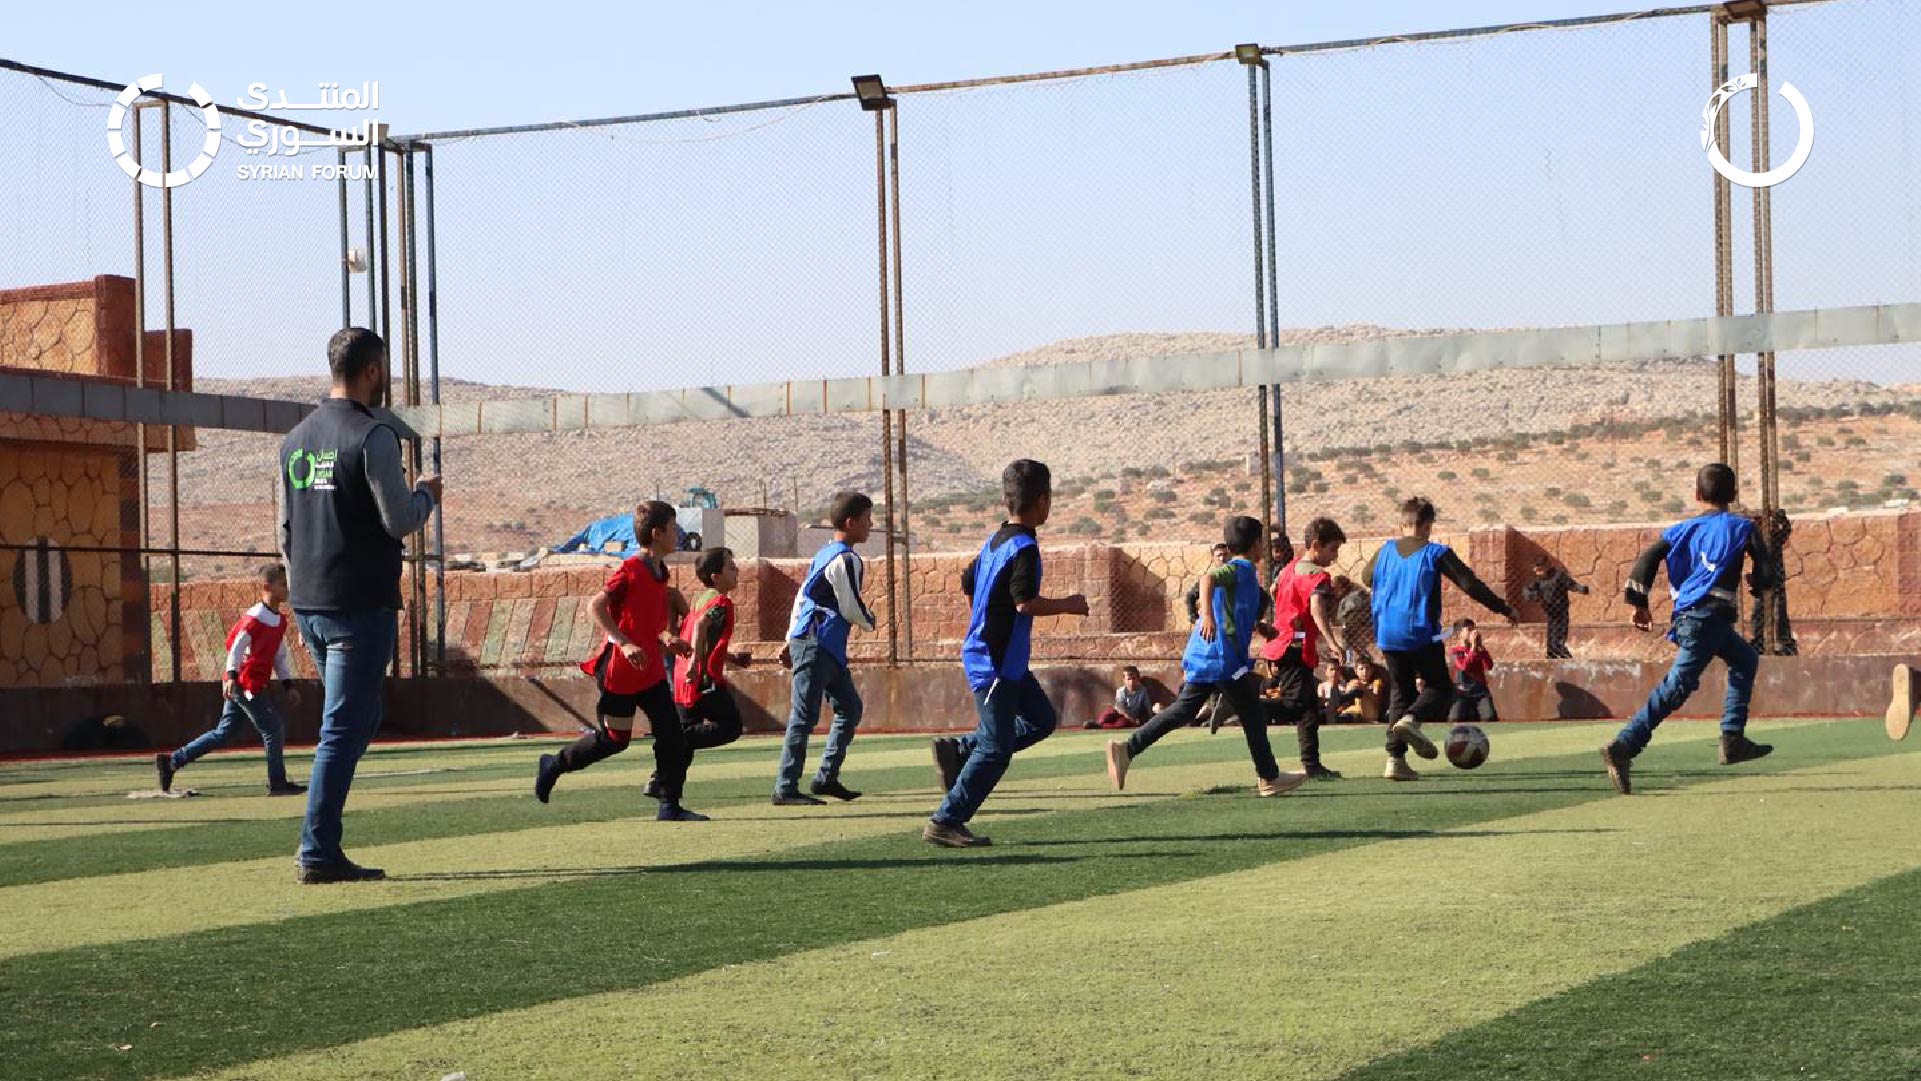 Champions of the Camps League in Harbnoush: Enhancing Community Cohesion and Developing Skills for Displaced Children